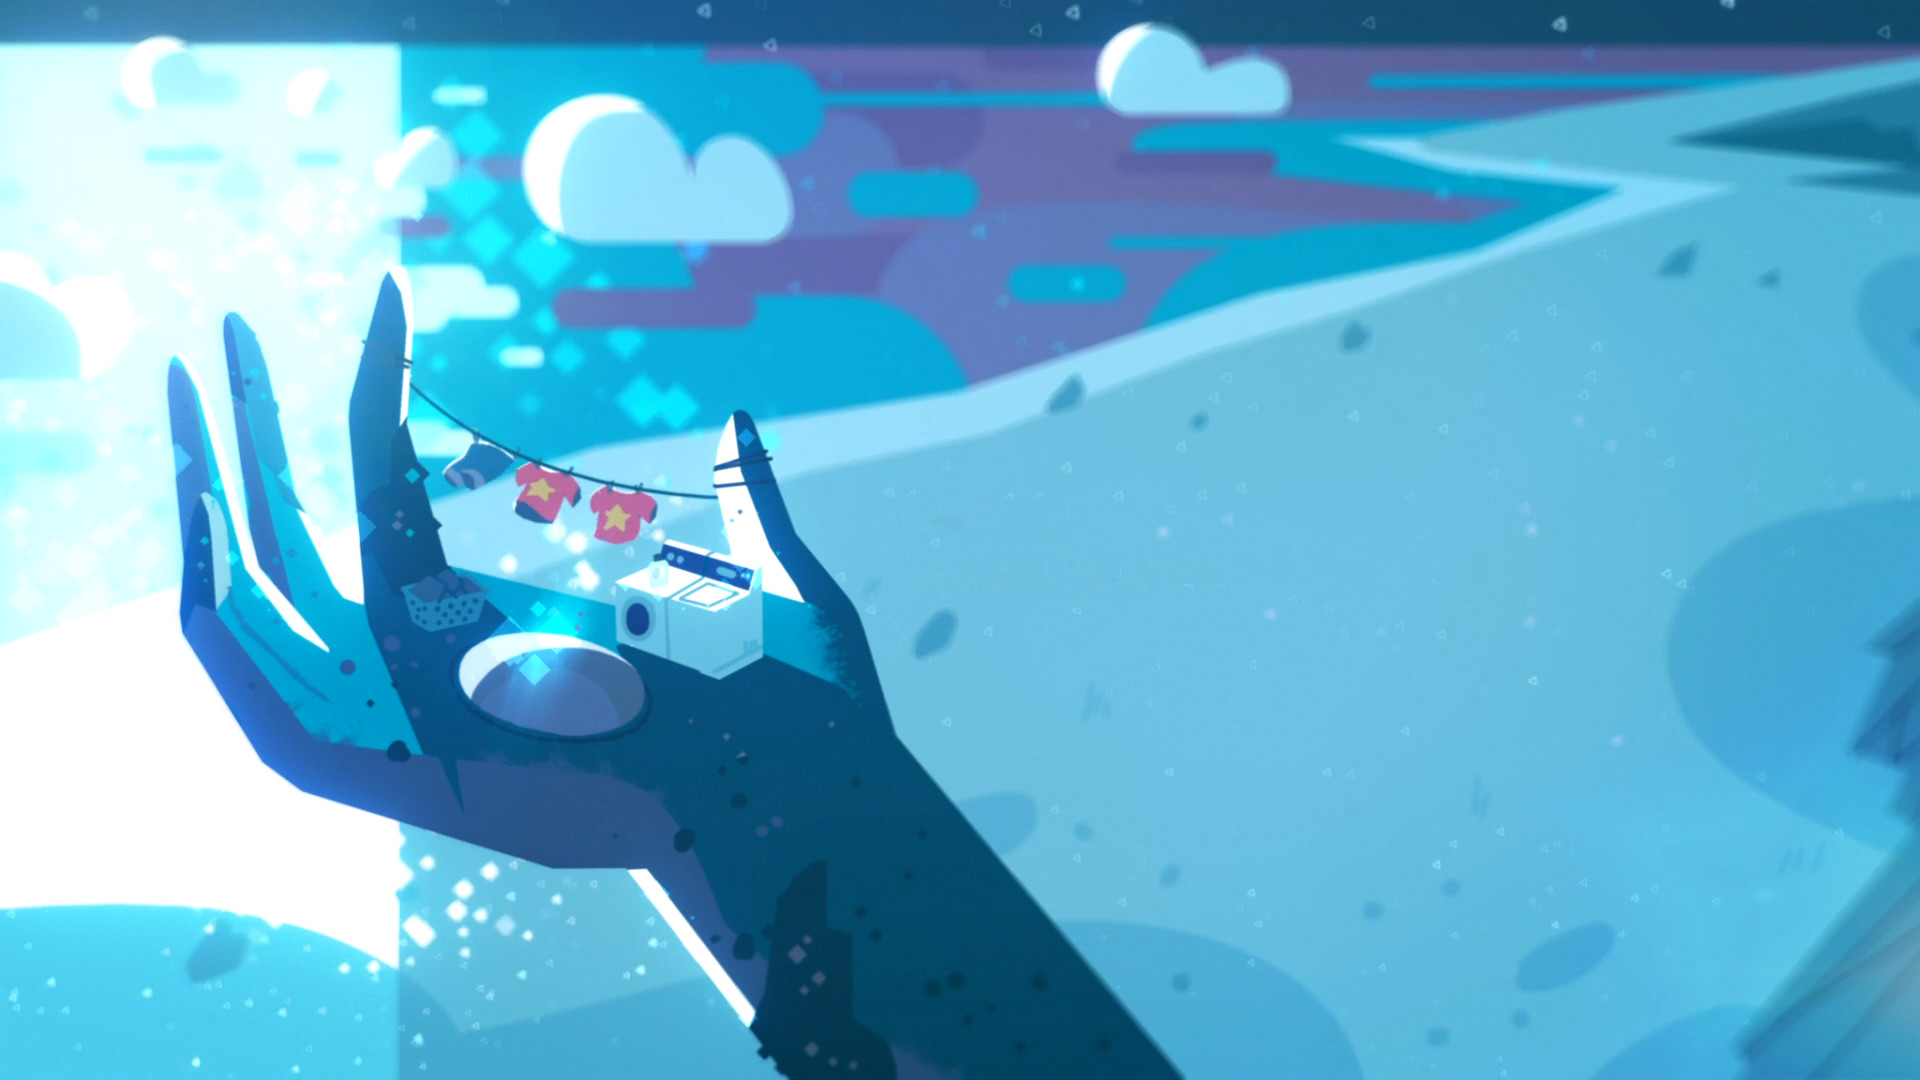 Explore More Wallpapers in the Steven Universe Subcategory